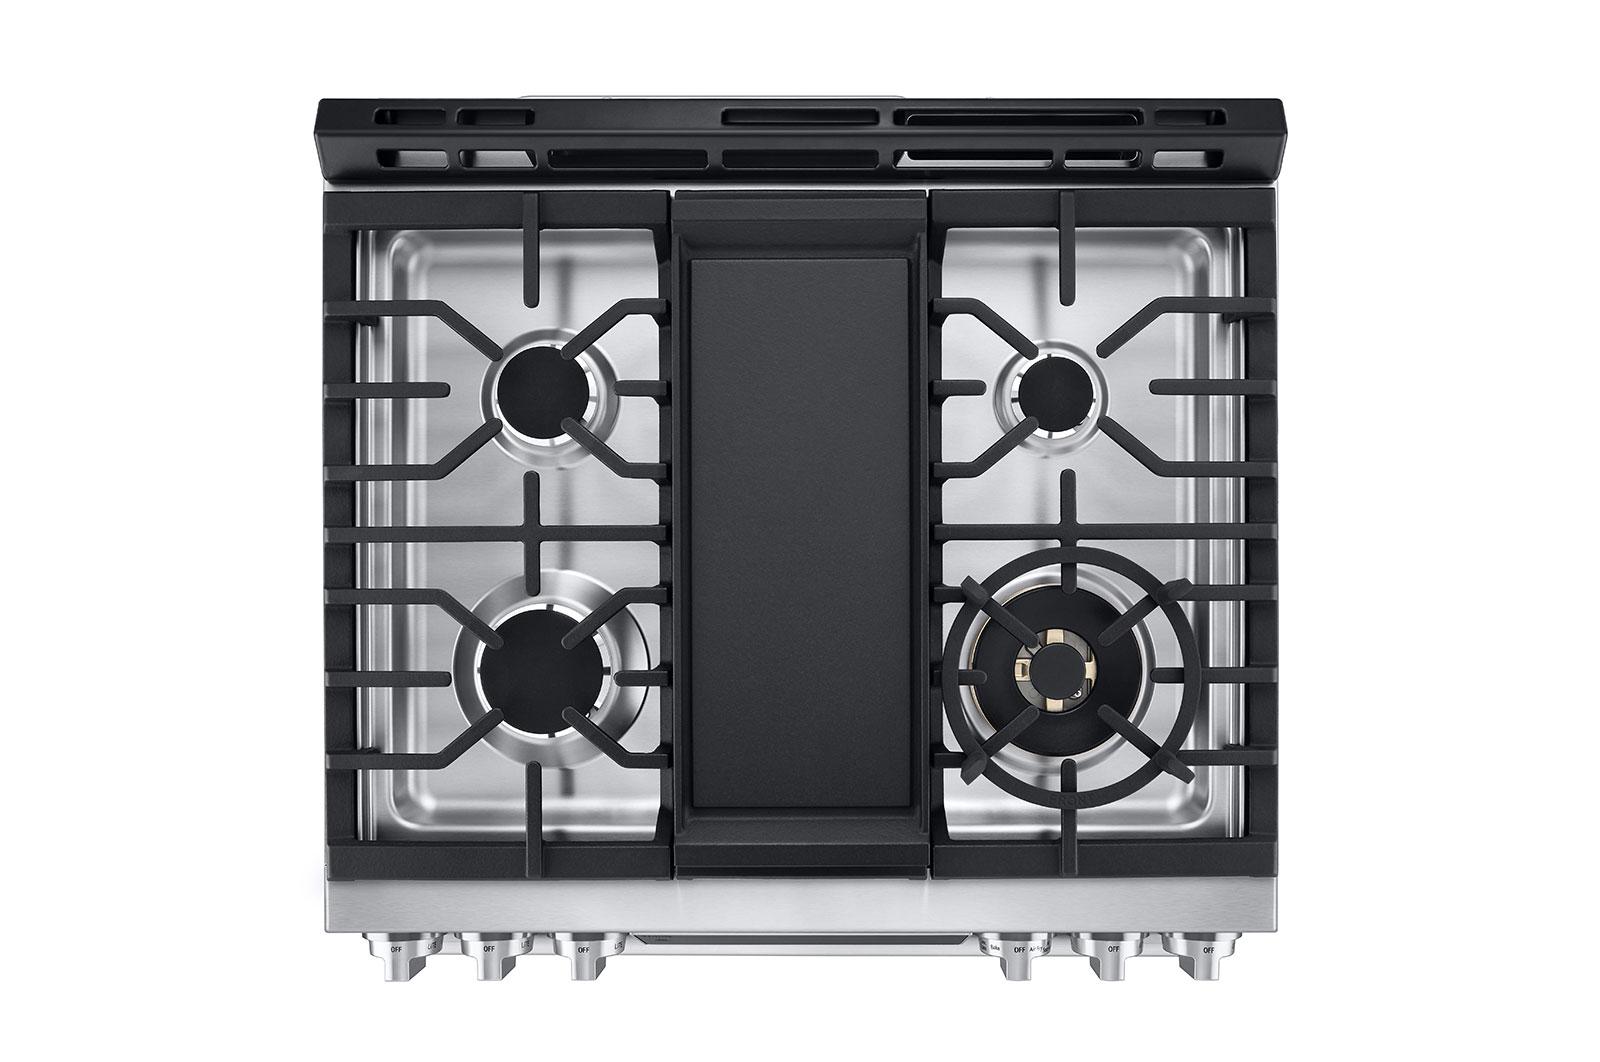 Lg 6.3 cu. ft. Smart wi-fi Dual Fuel Slide-in Range with ProBake Convection® and EasyClean®